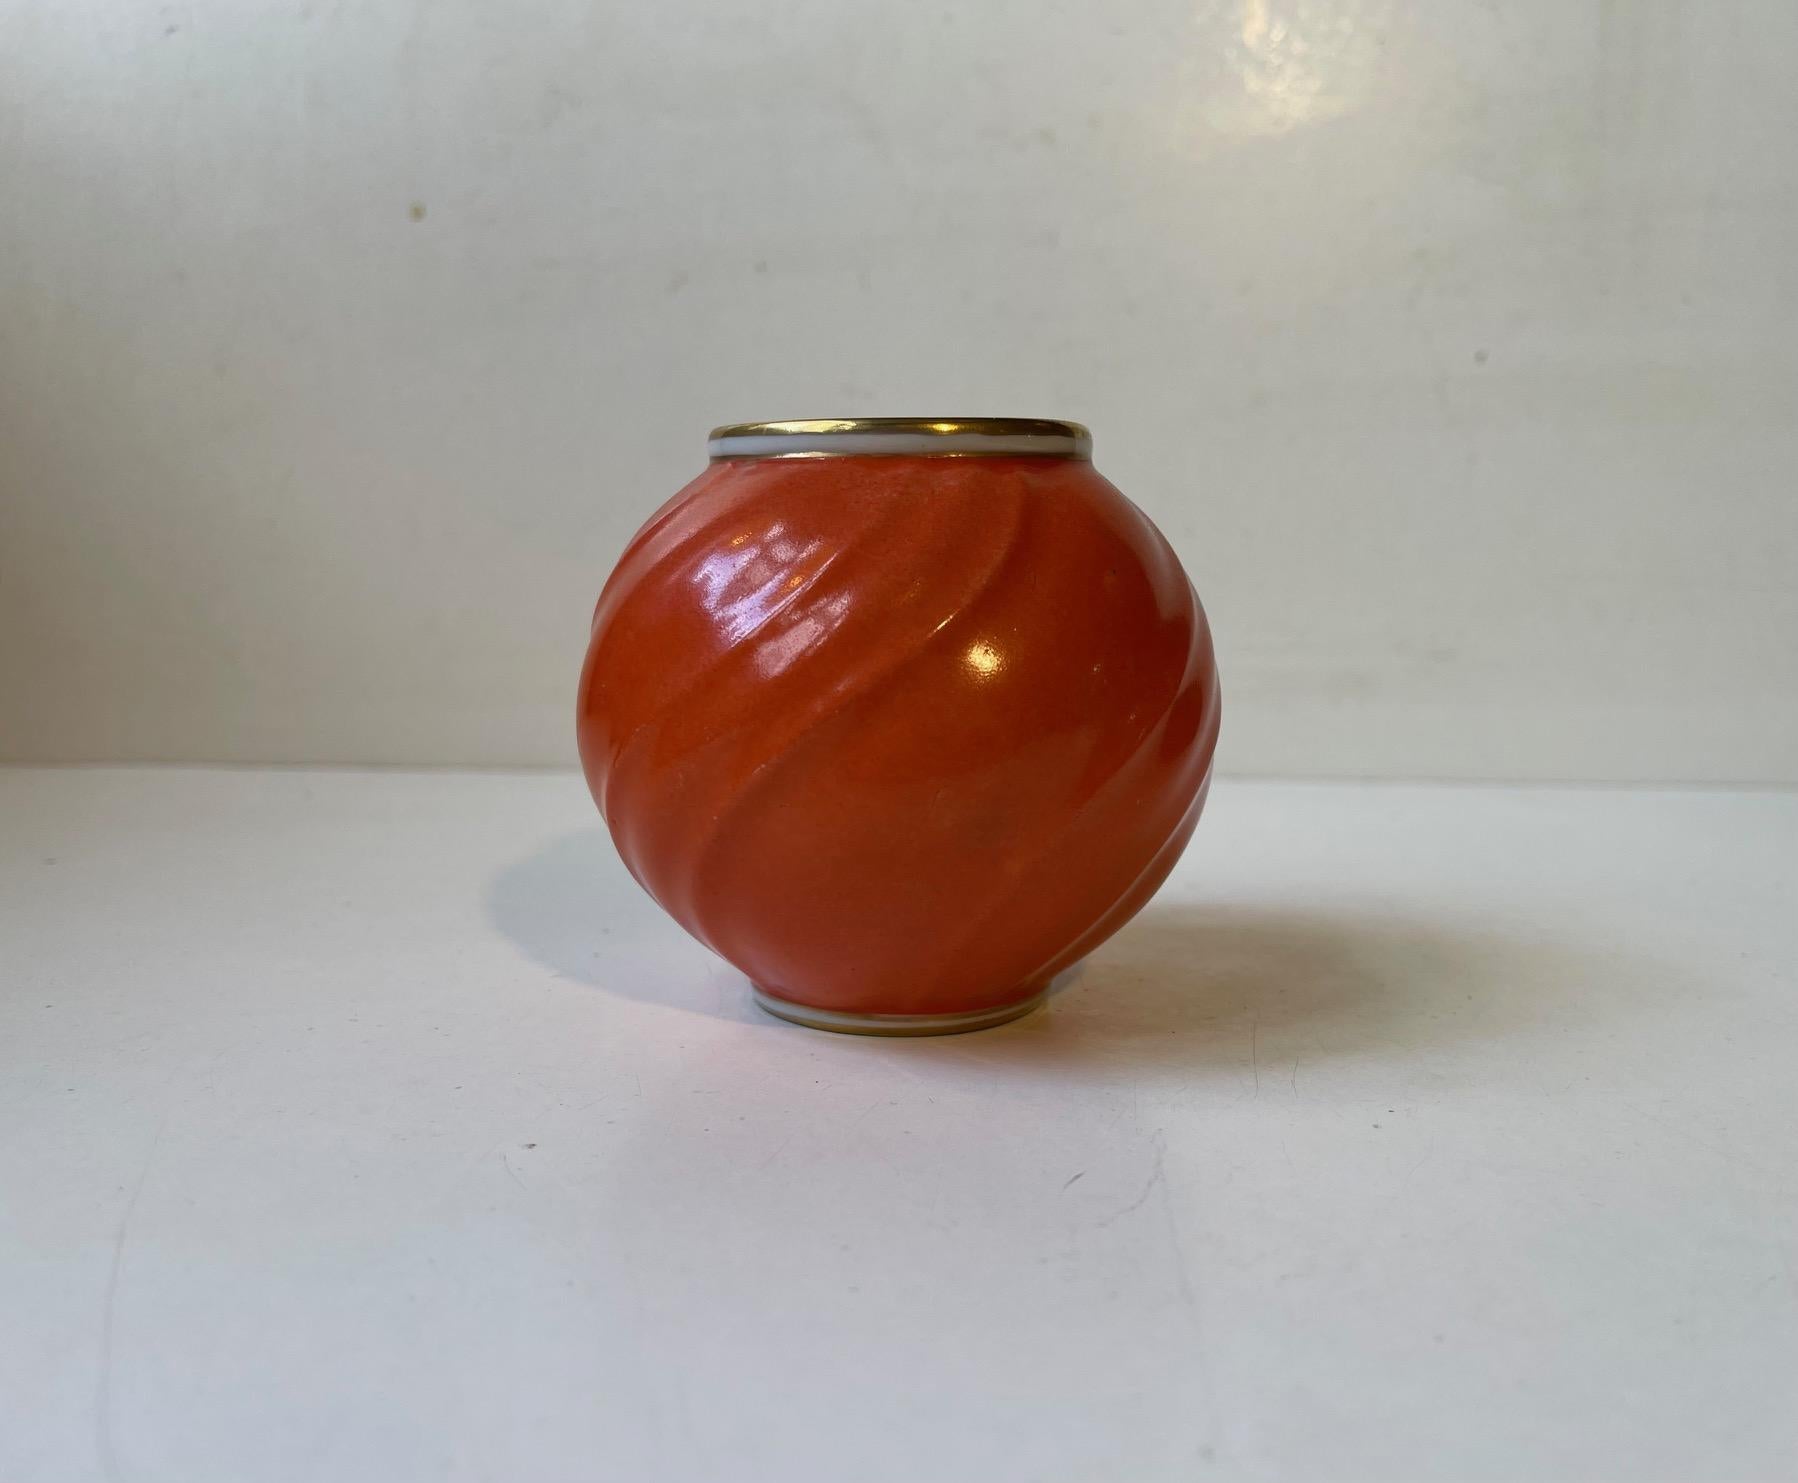 Coral red/orange glazed ball shaped porcelain vase with swirls. Manufactured and designed by Lyngby Porcelæn in Denmark during the 1930s. Fully marked to the base. Measurements: H: 8.5 cm, D: 9 cm.